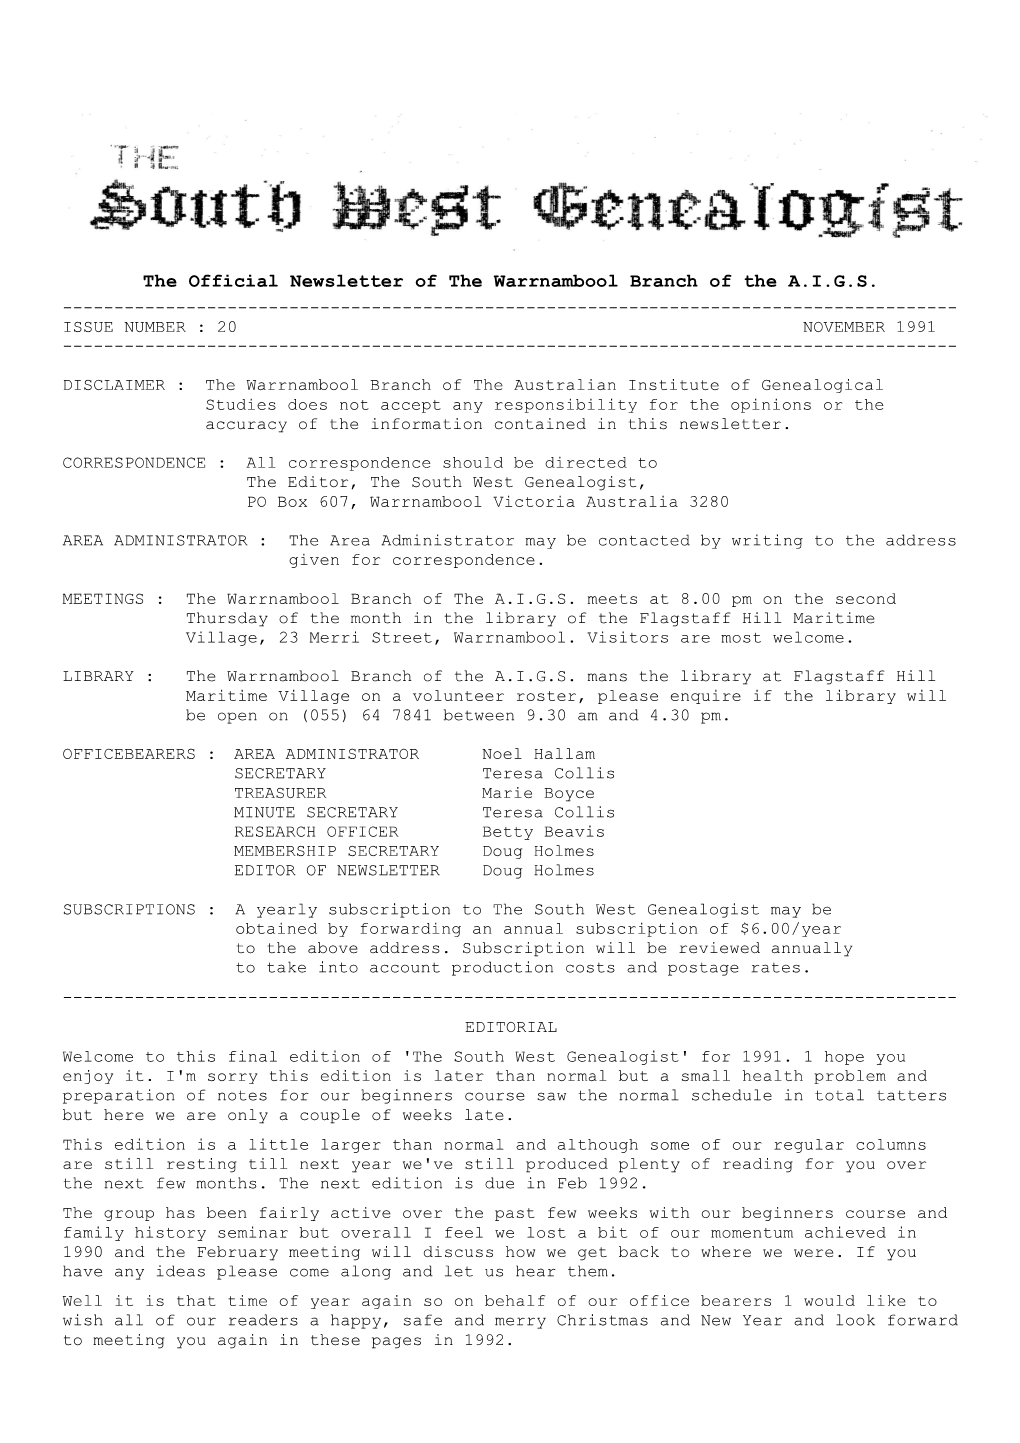 The Official Newsletter of the Warrnambool Branch of the A.I.G.S. ------ISSUE NUMBER : 20 NOVEMBER 1991